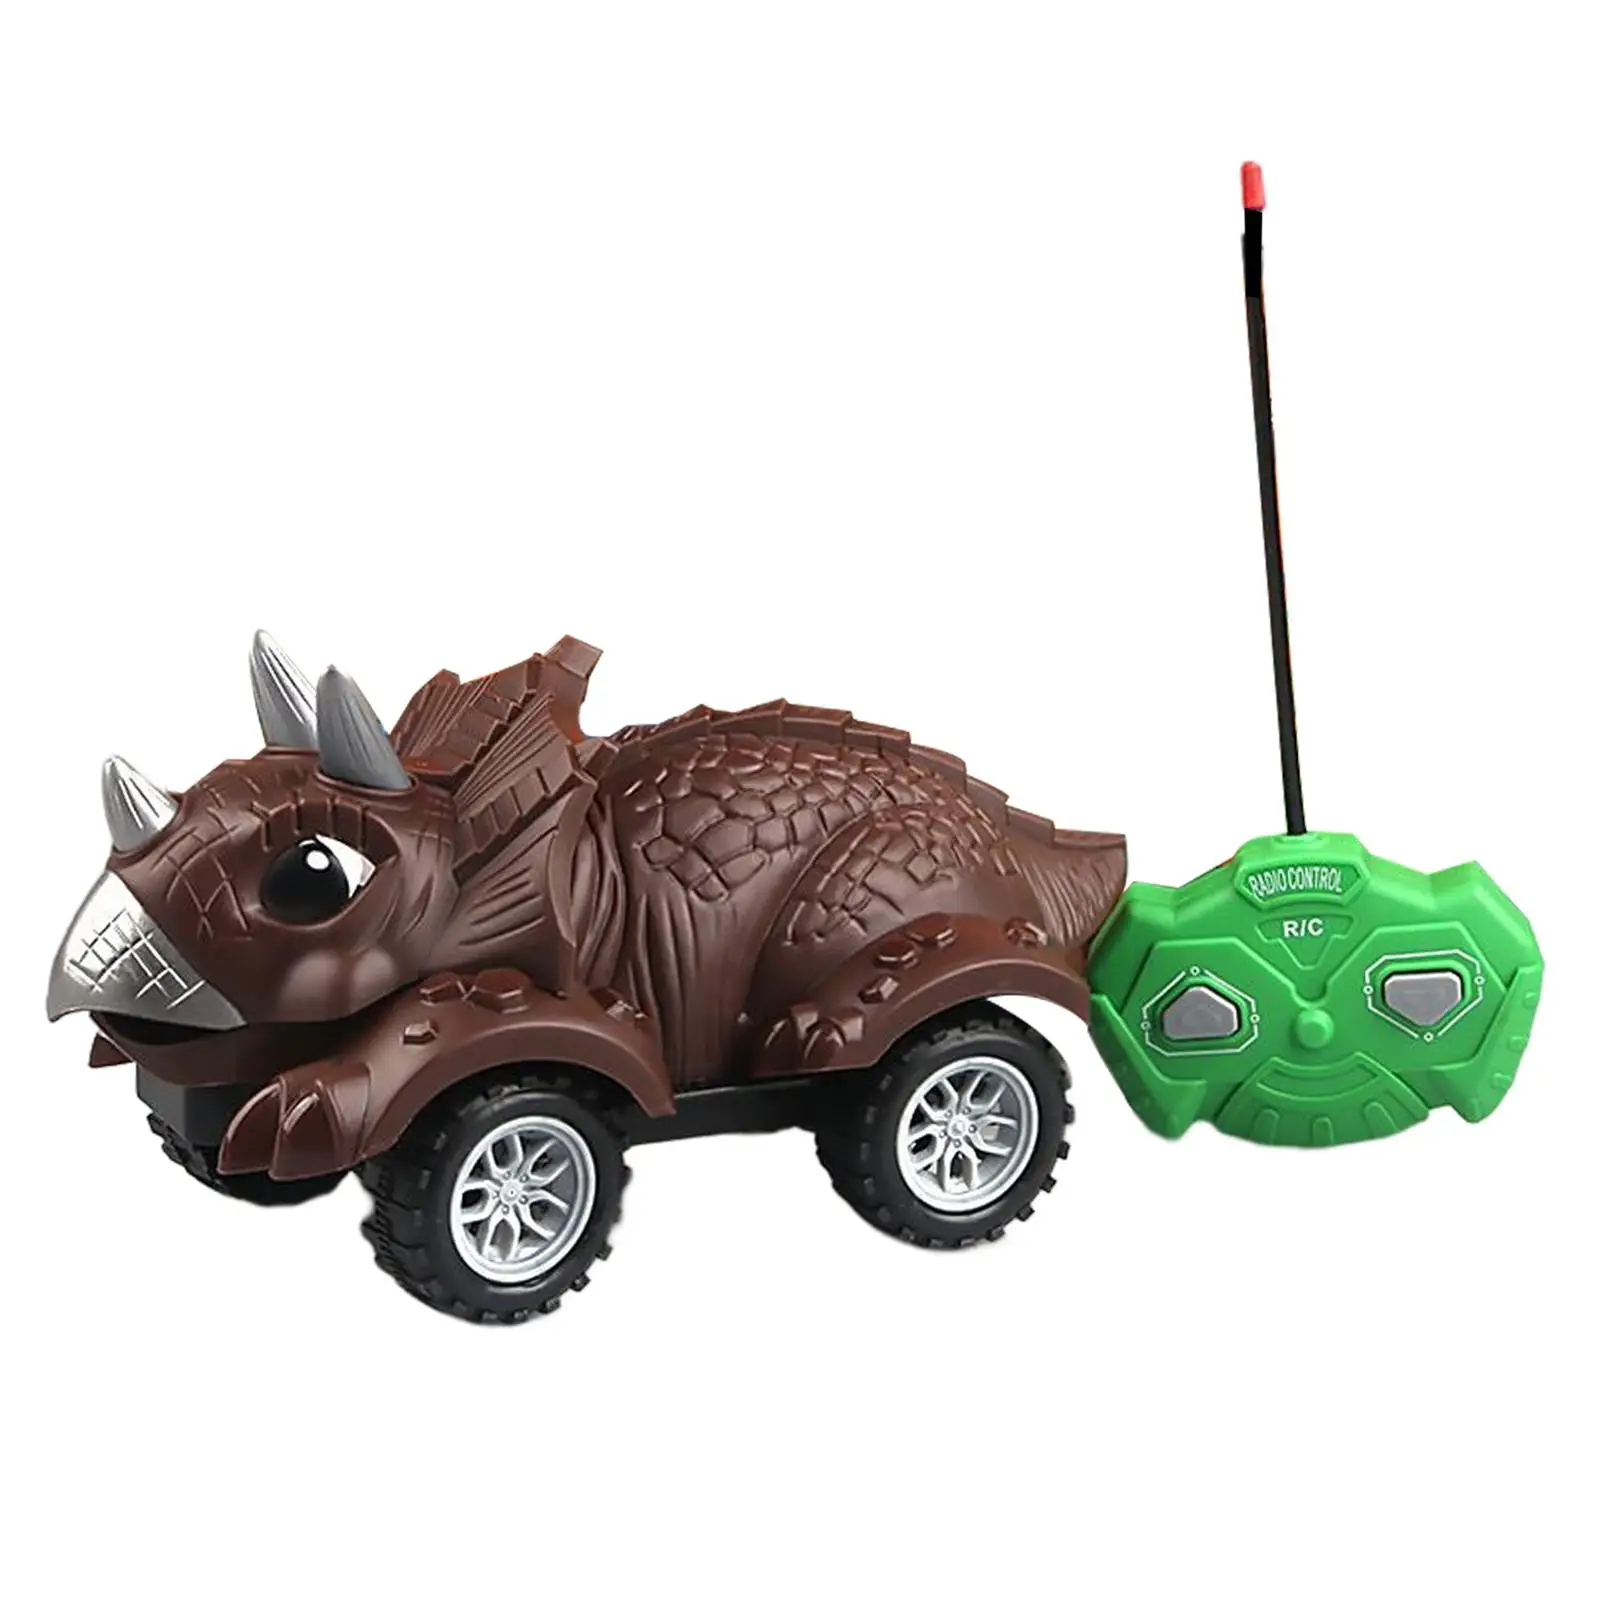 Remote Control Dinosaur Car Toys DIY Disassembly Learning Educational toys Toy Vehicle for Party Favors Boys 3-5 Children